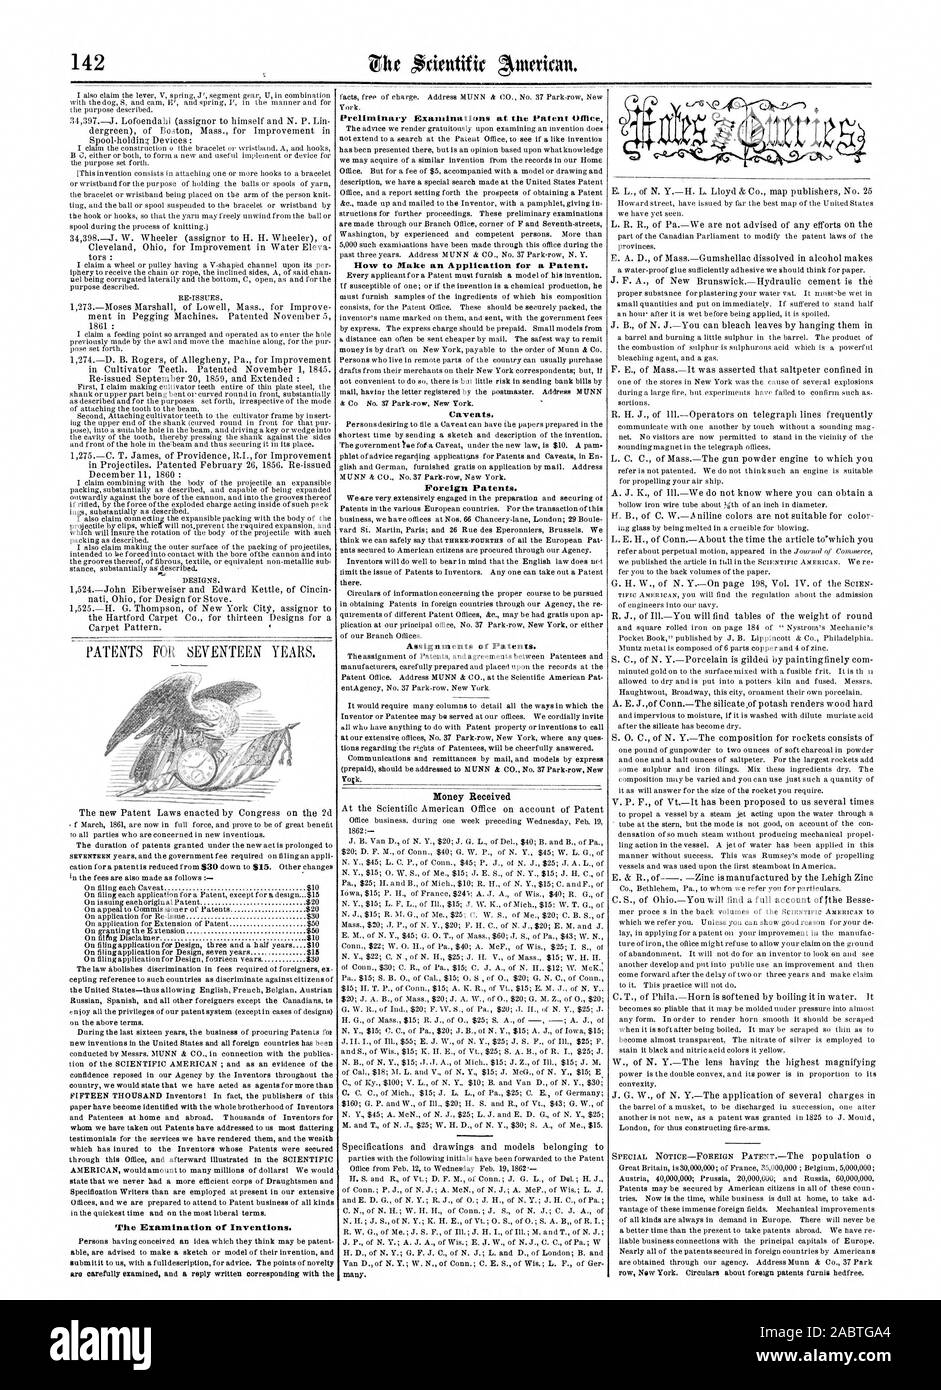 The Examination of Inventions. Preliminary Examinations at the Patent Office How to Make an Application for a Patent. Caveats. Foreign Patents. Assignments of Patents., scientific american, 1862-03-01 Stock Photo